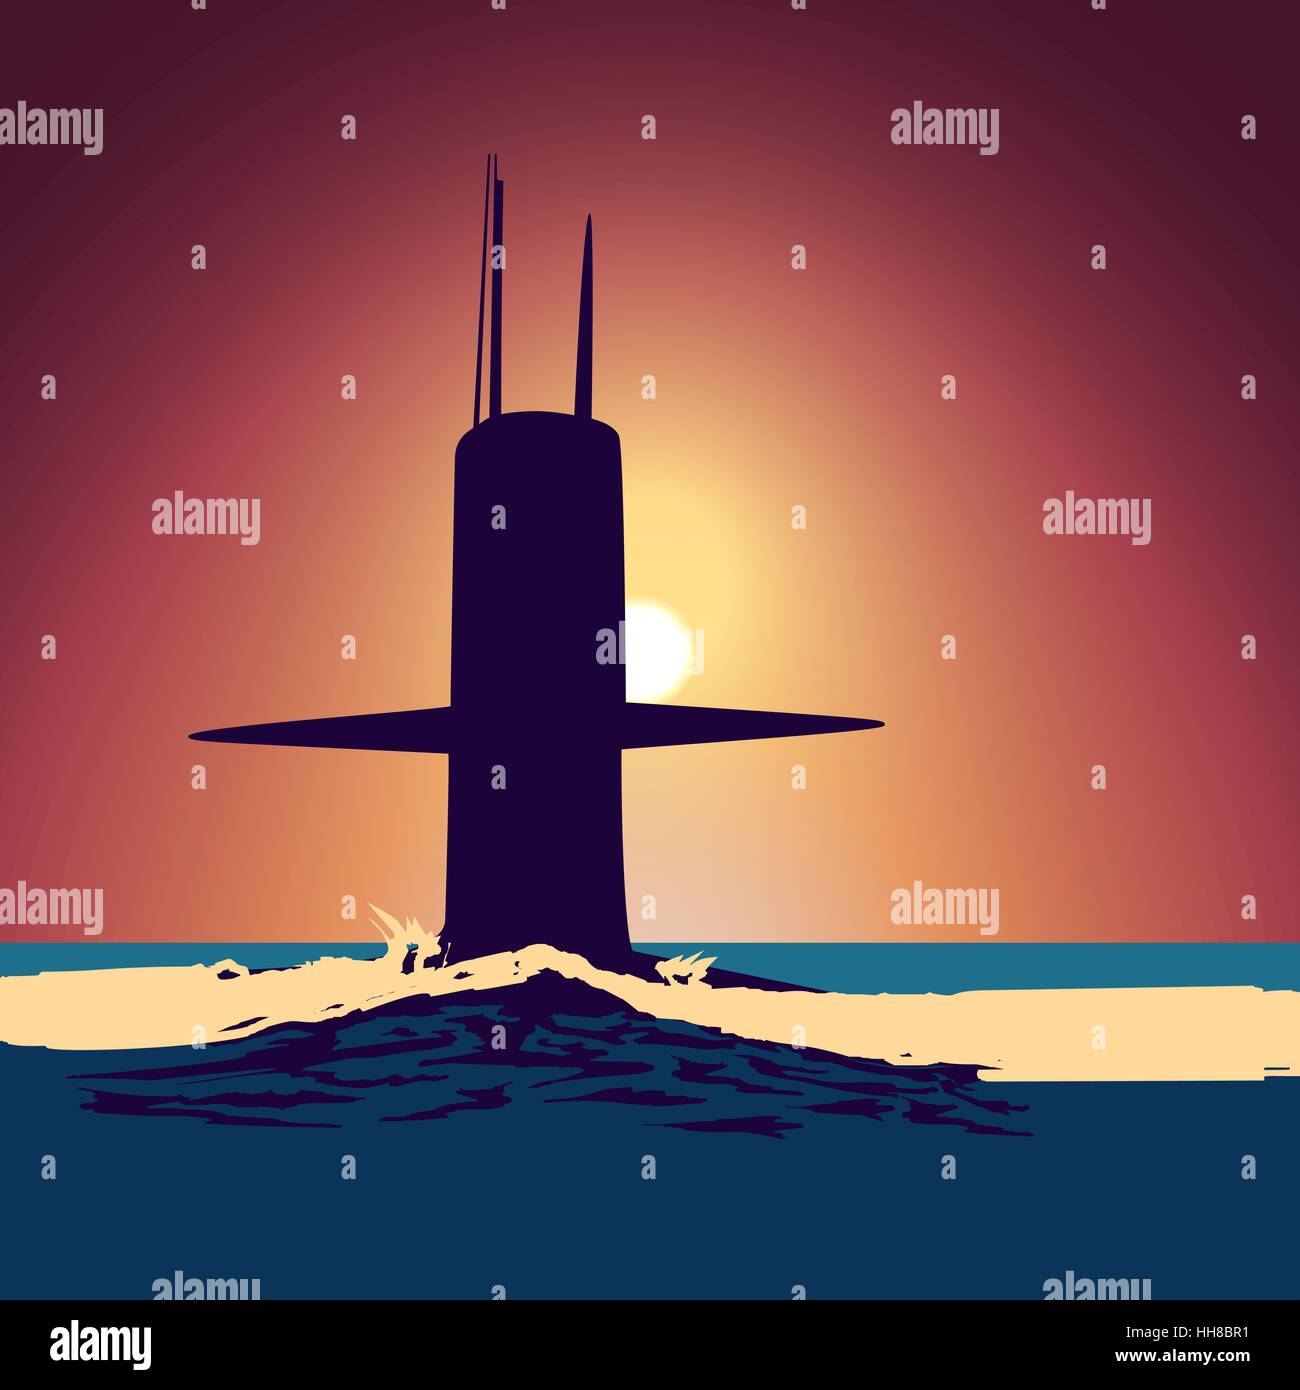 Military submarine silhouette on the background of a sunset Stock Vector